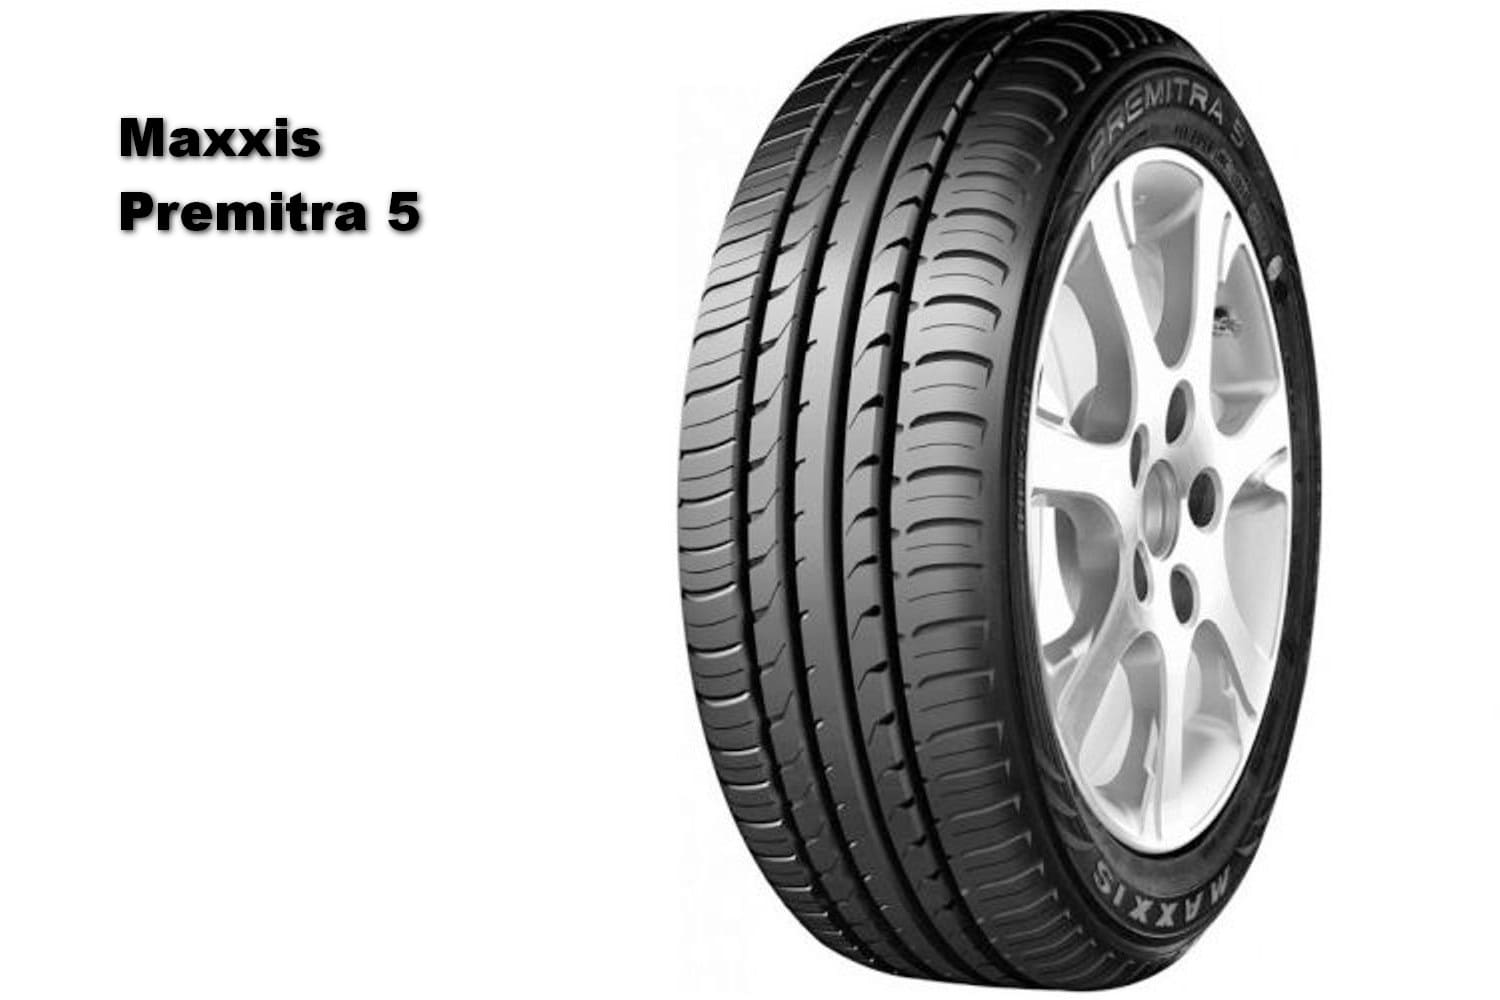 Maxxis premitra hp5 225 60 r17. Максис hp5 Premitra. Maxxis hp5. Maxxis Premitra 5. Maxxis Premitra hp5 235/55 r17 99v.